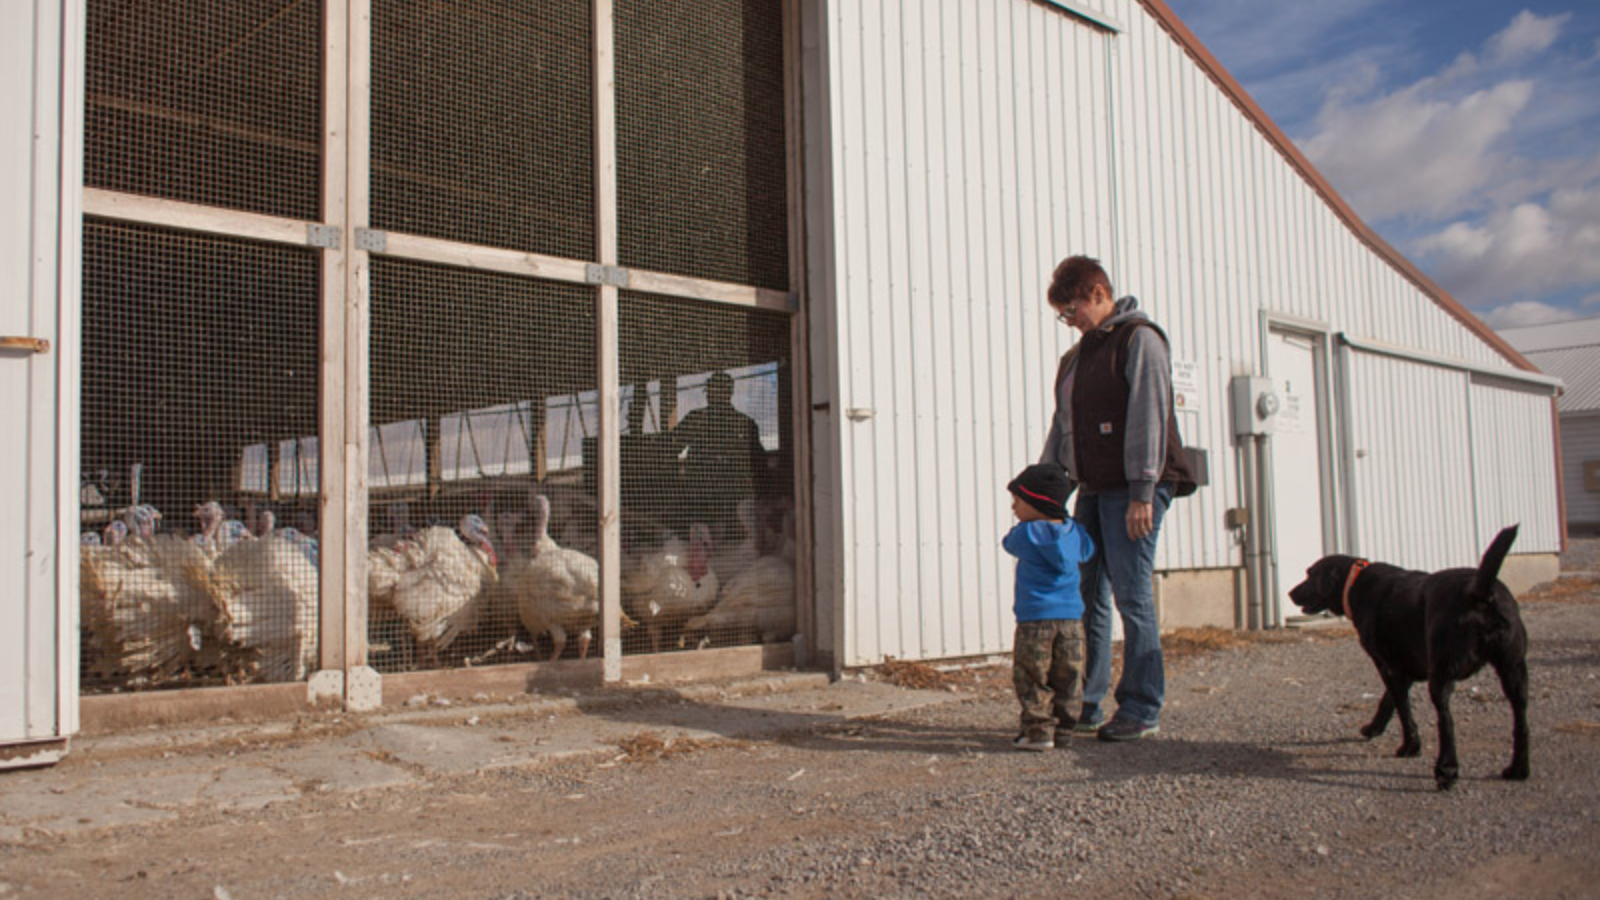 Proper covering for Poultry is essential for stopping the spread.